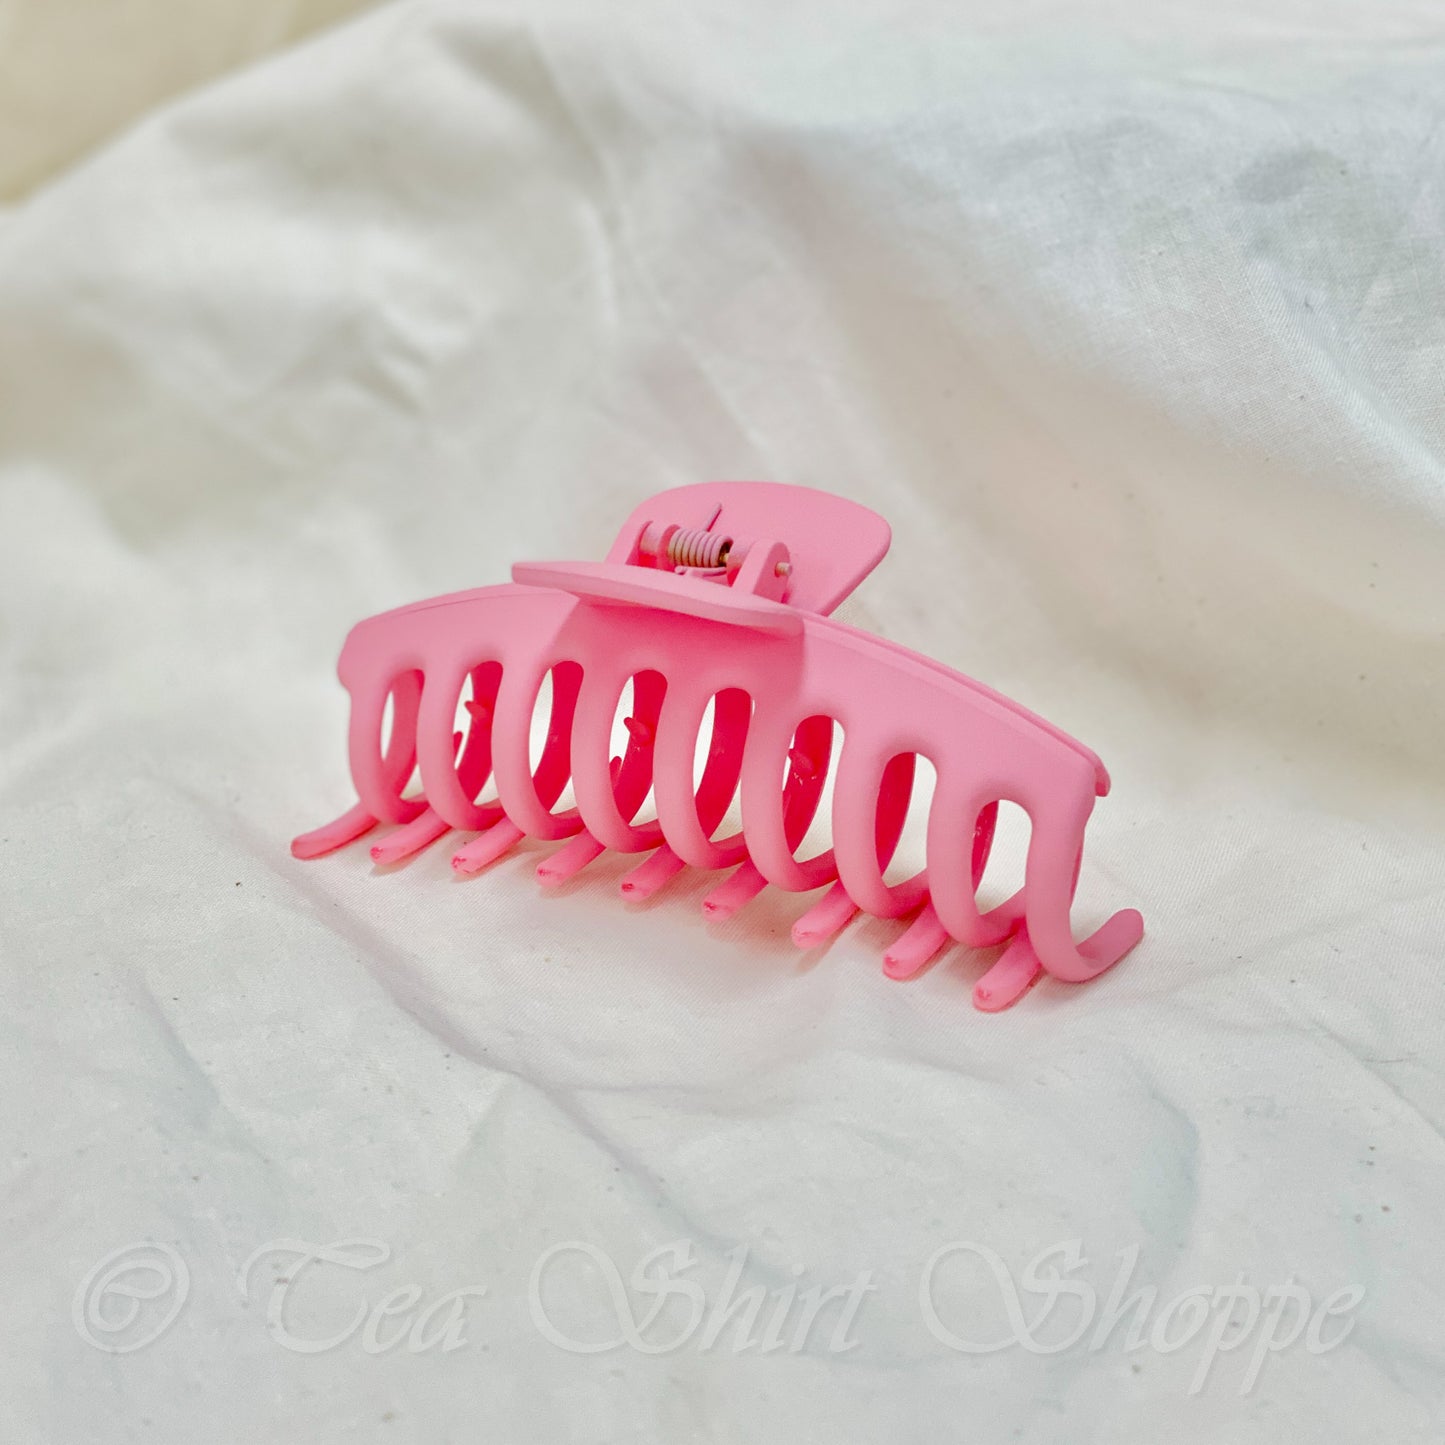 4.25" pink claw clip